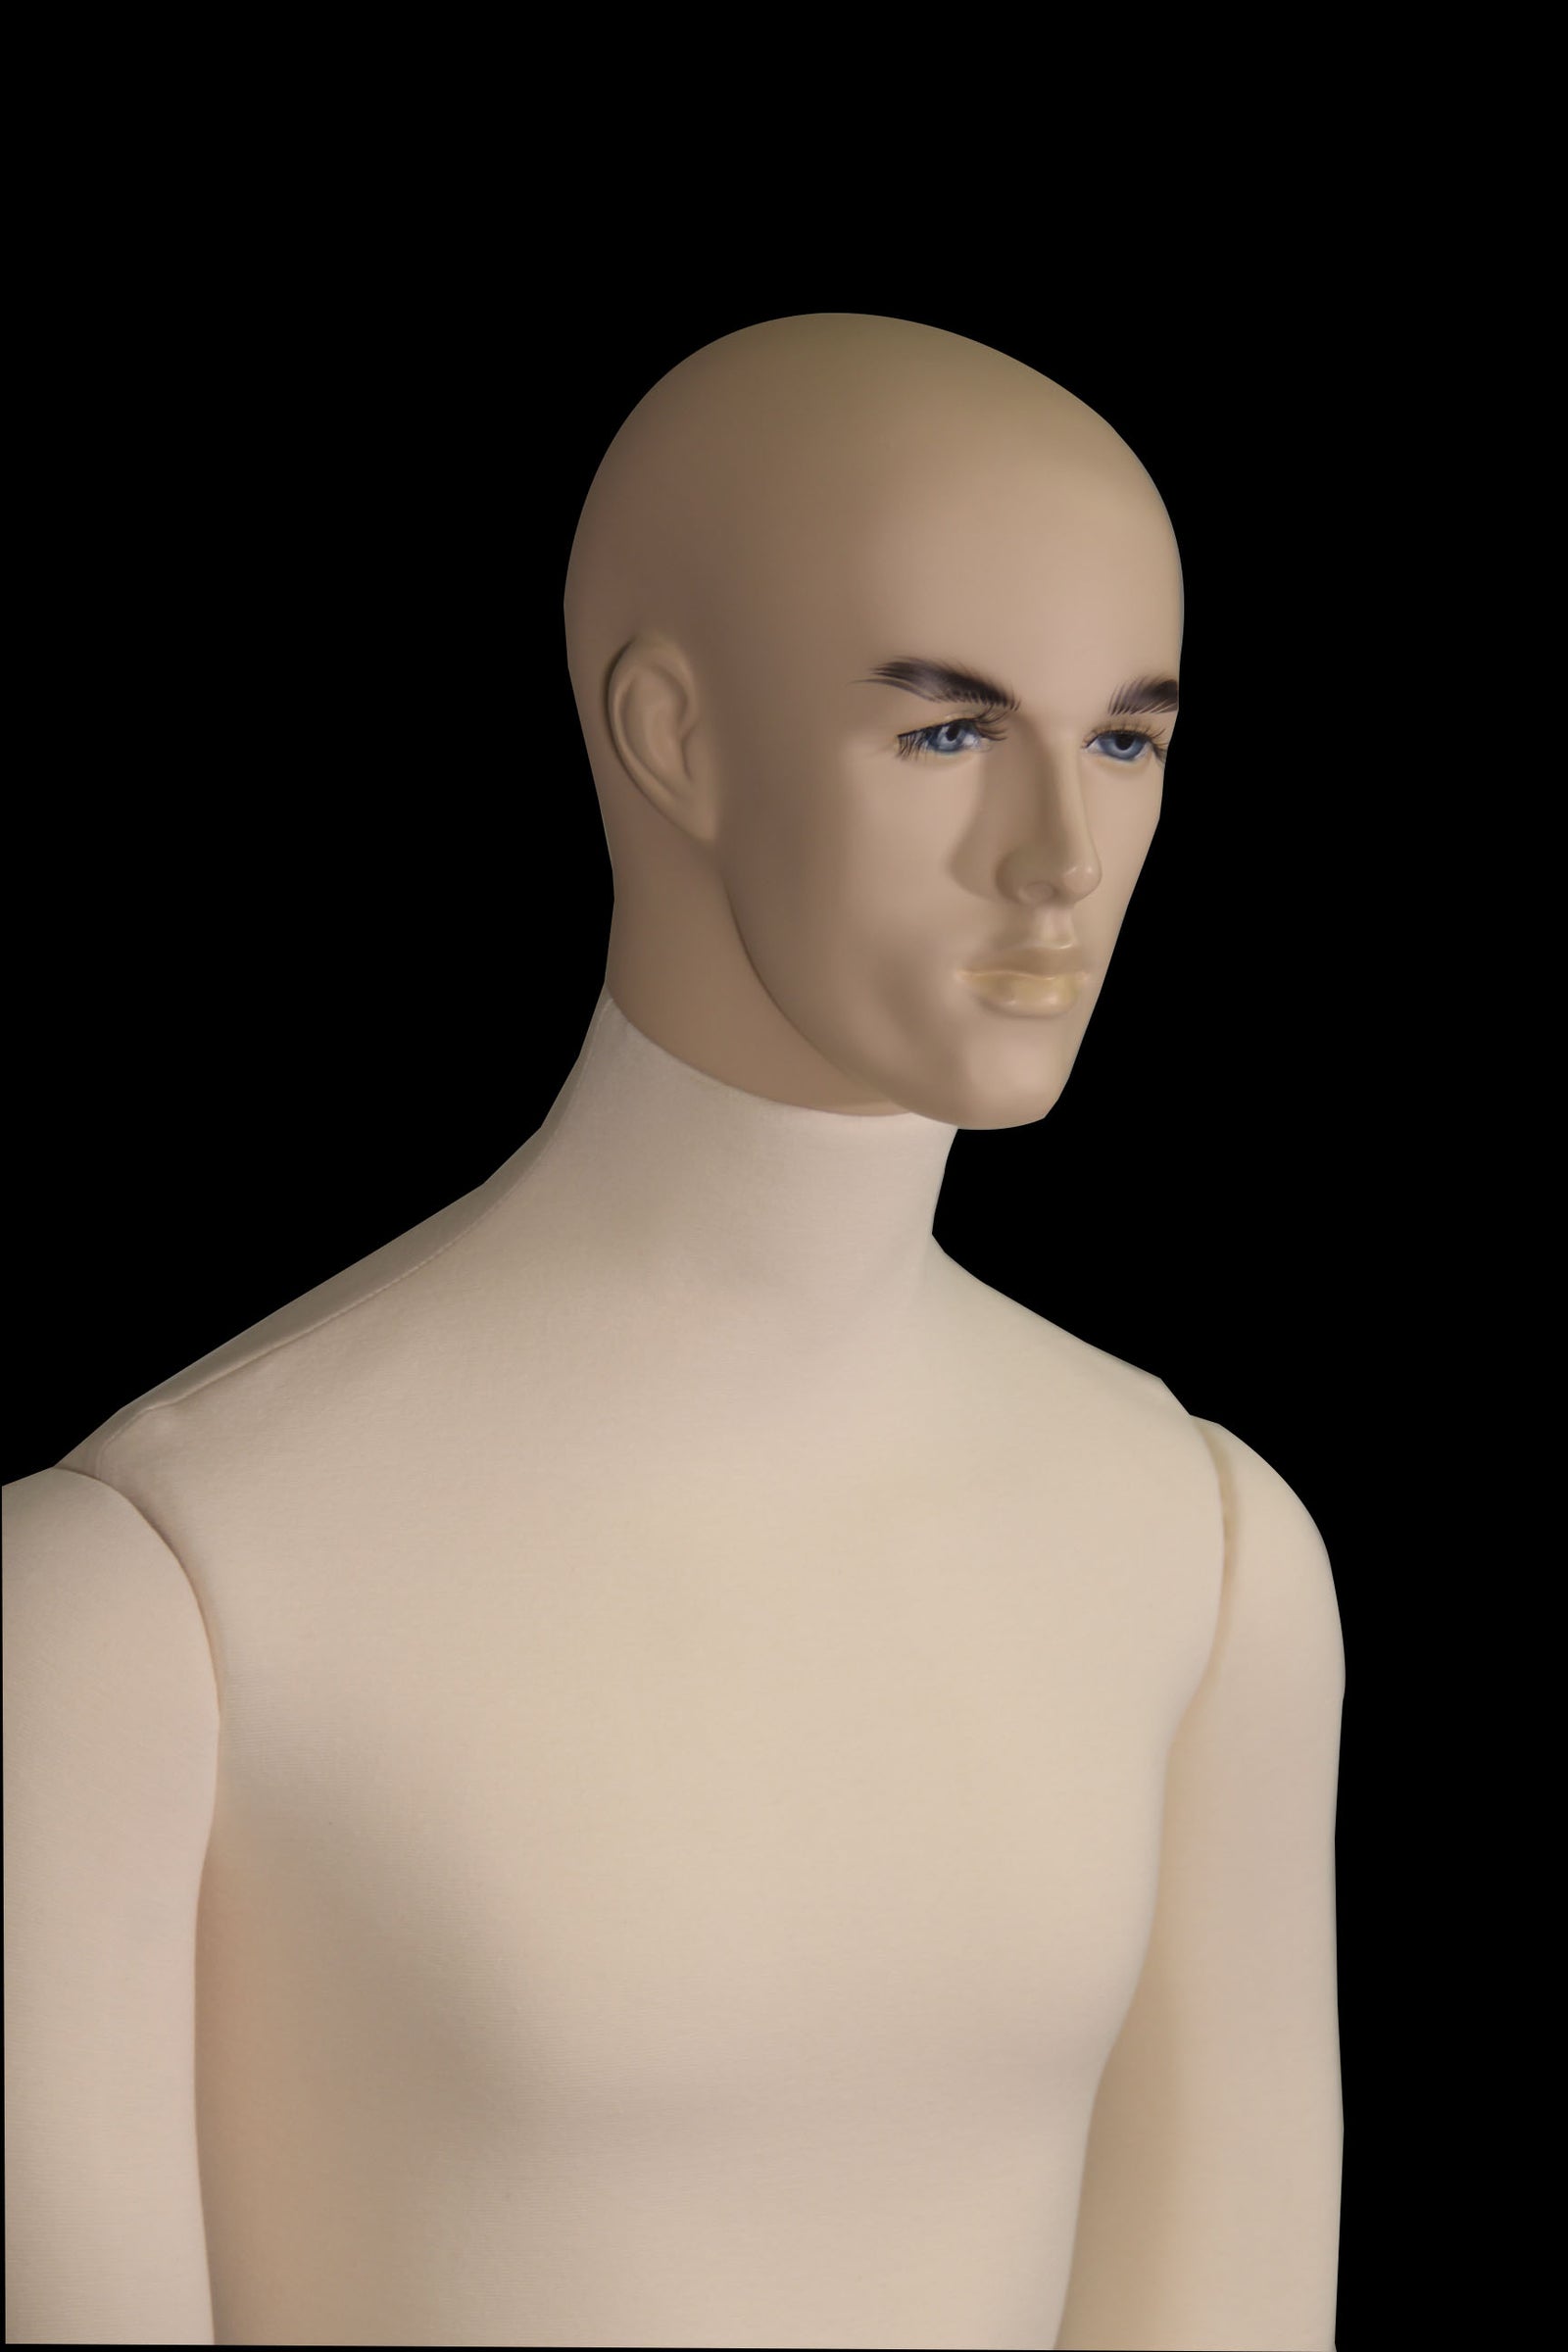 Male Mannequin Oval Head Arms At Sides Las Vegas Mannequins 4221